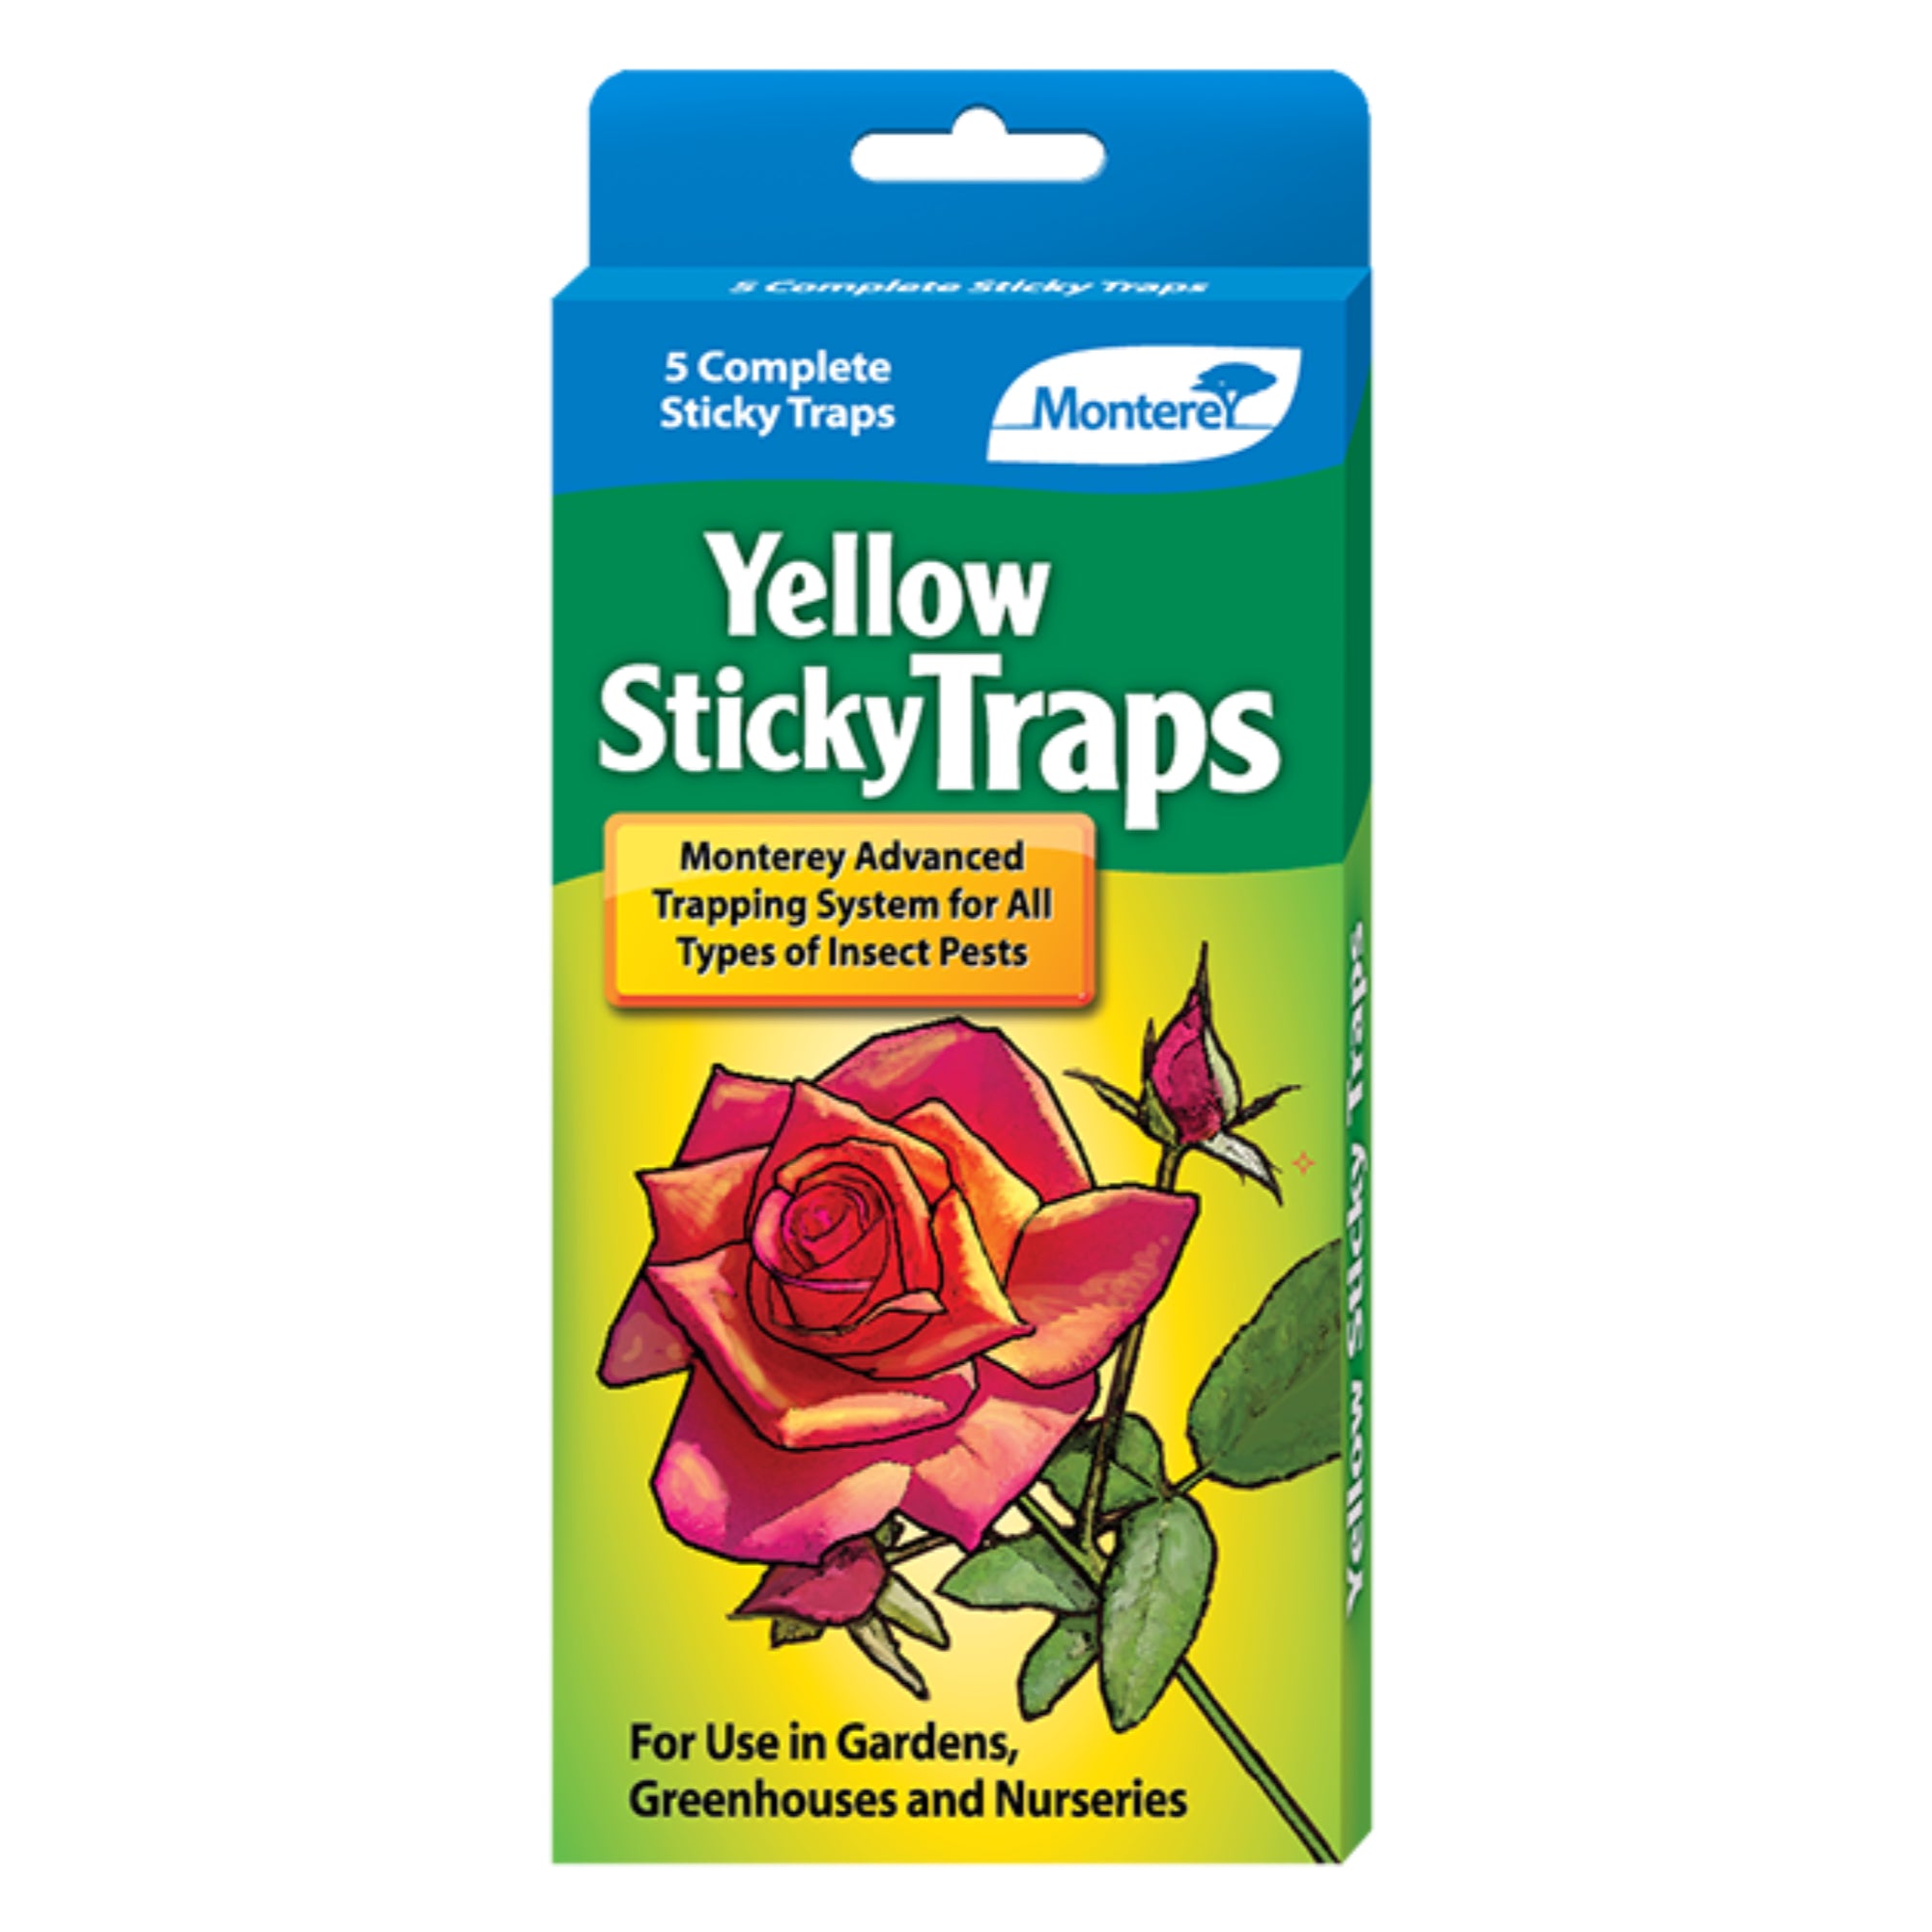 Monterey (#LG8800) Yellow Sticky Traps (for all types of insects) 5 per pack